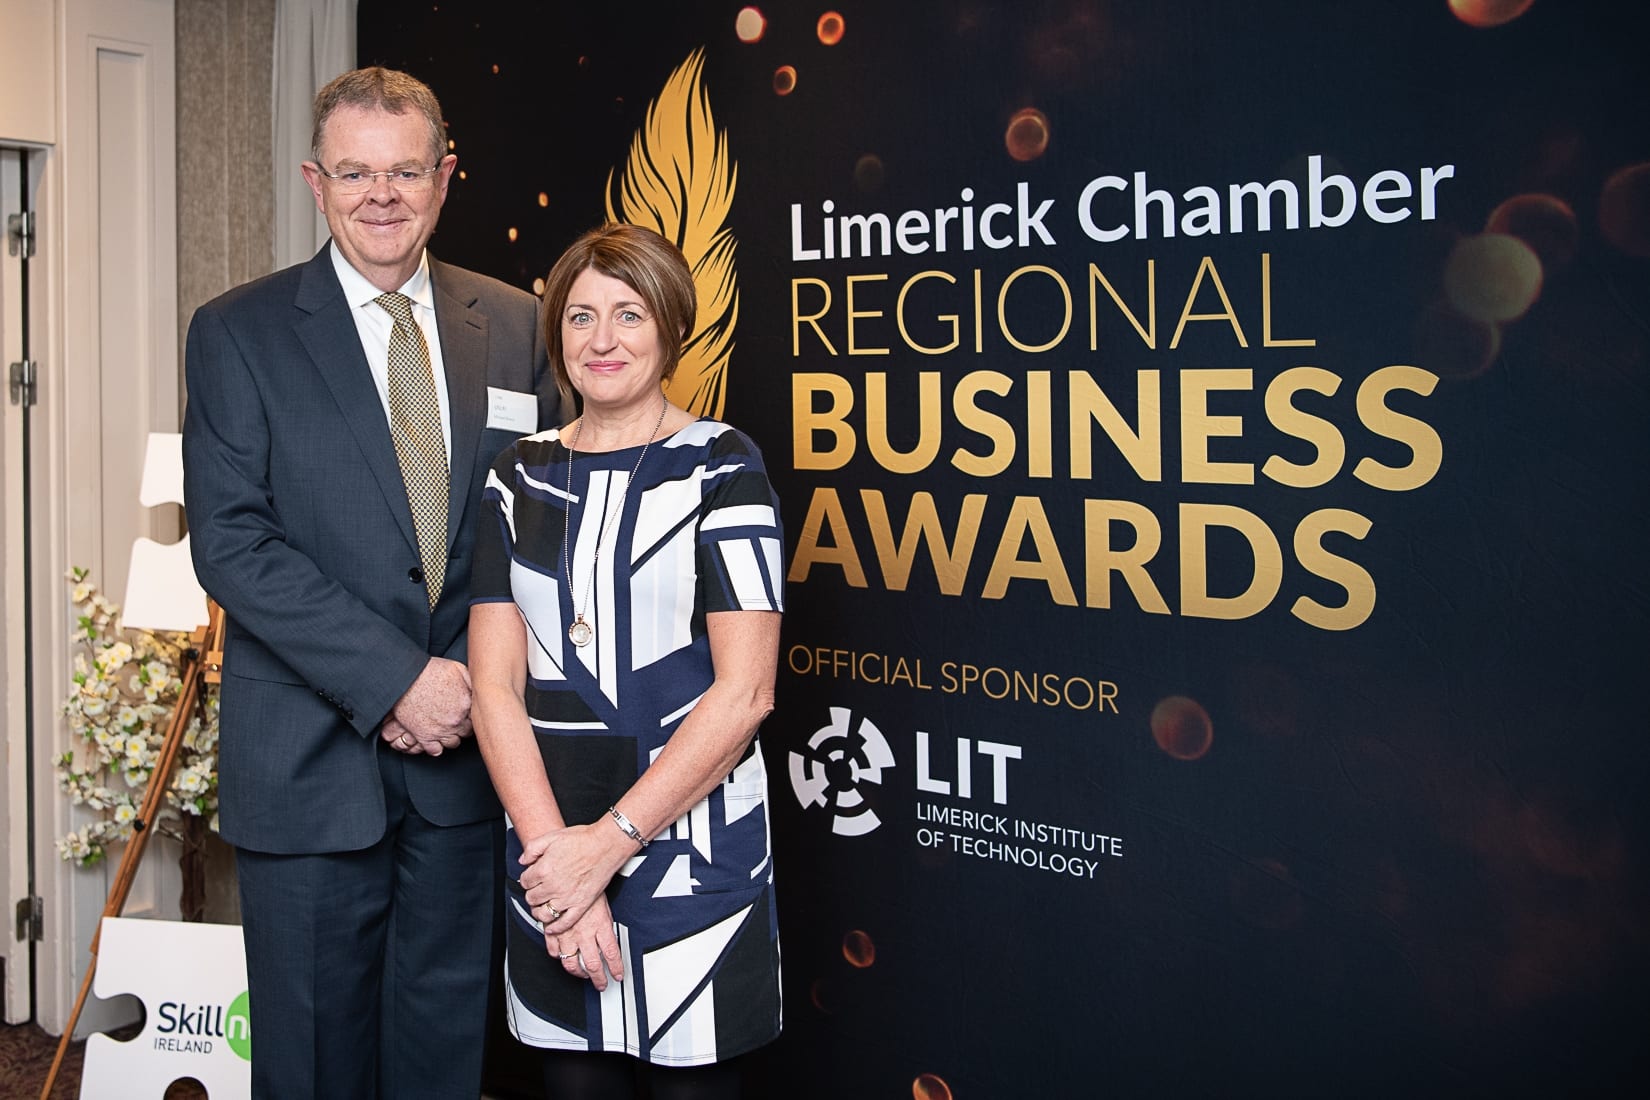 No repro fee-Limerick Chamber President Dinner Shortlist announcement which was held in The Limerick Strand Hotel on Wednesday 16th October  - From Left to Right: Michael Howes- GECAS, Kay Loughrane - Shannon Hertiage
Photo credit Shauna Kennedy